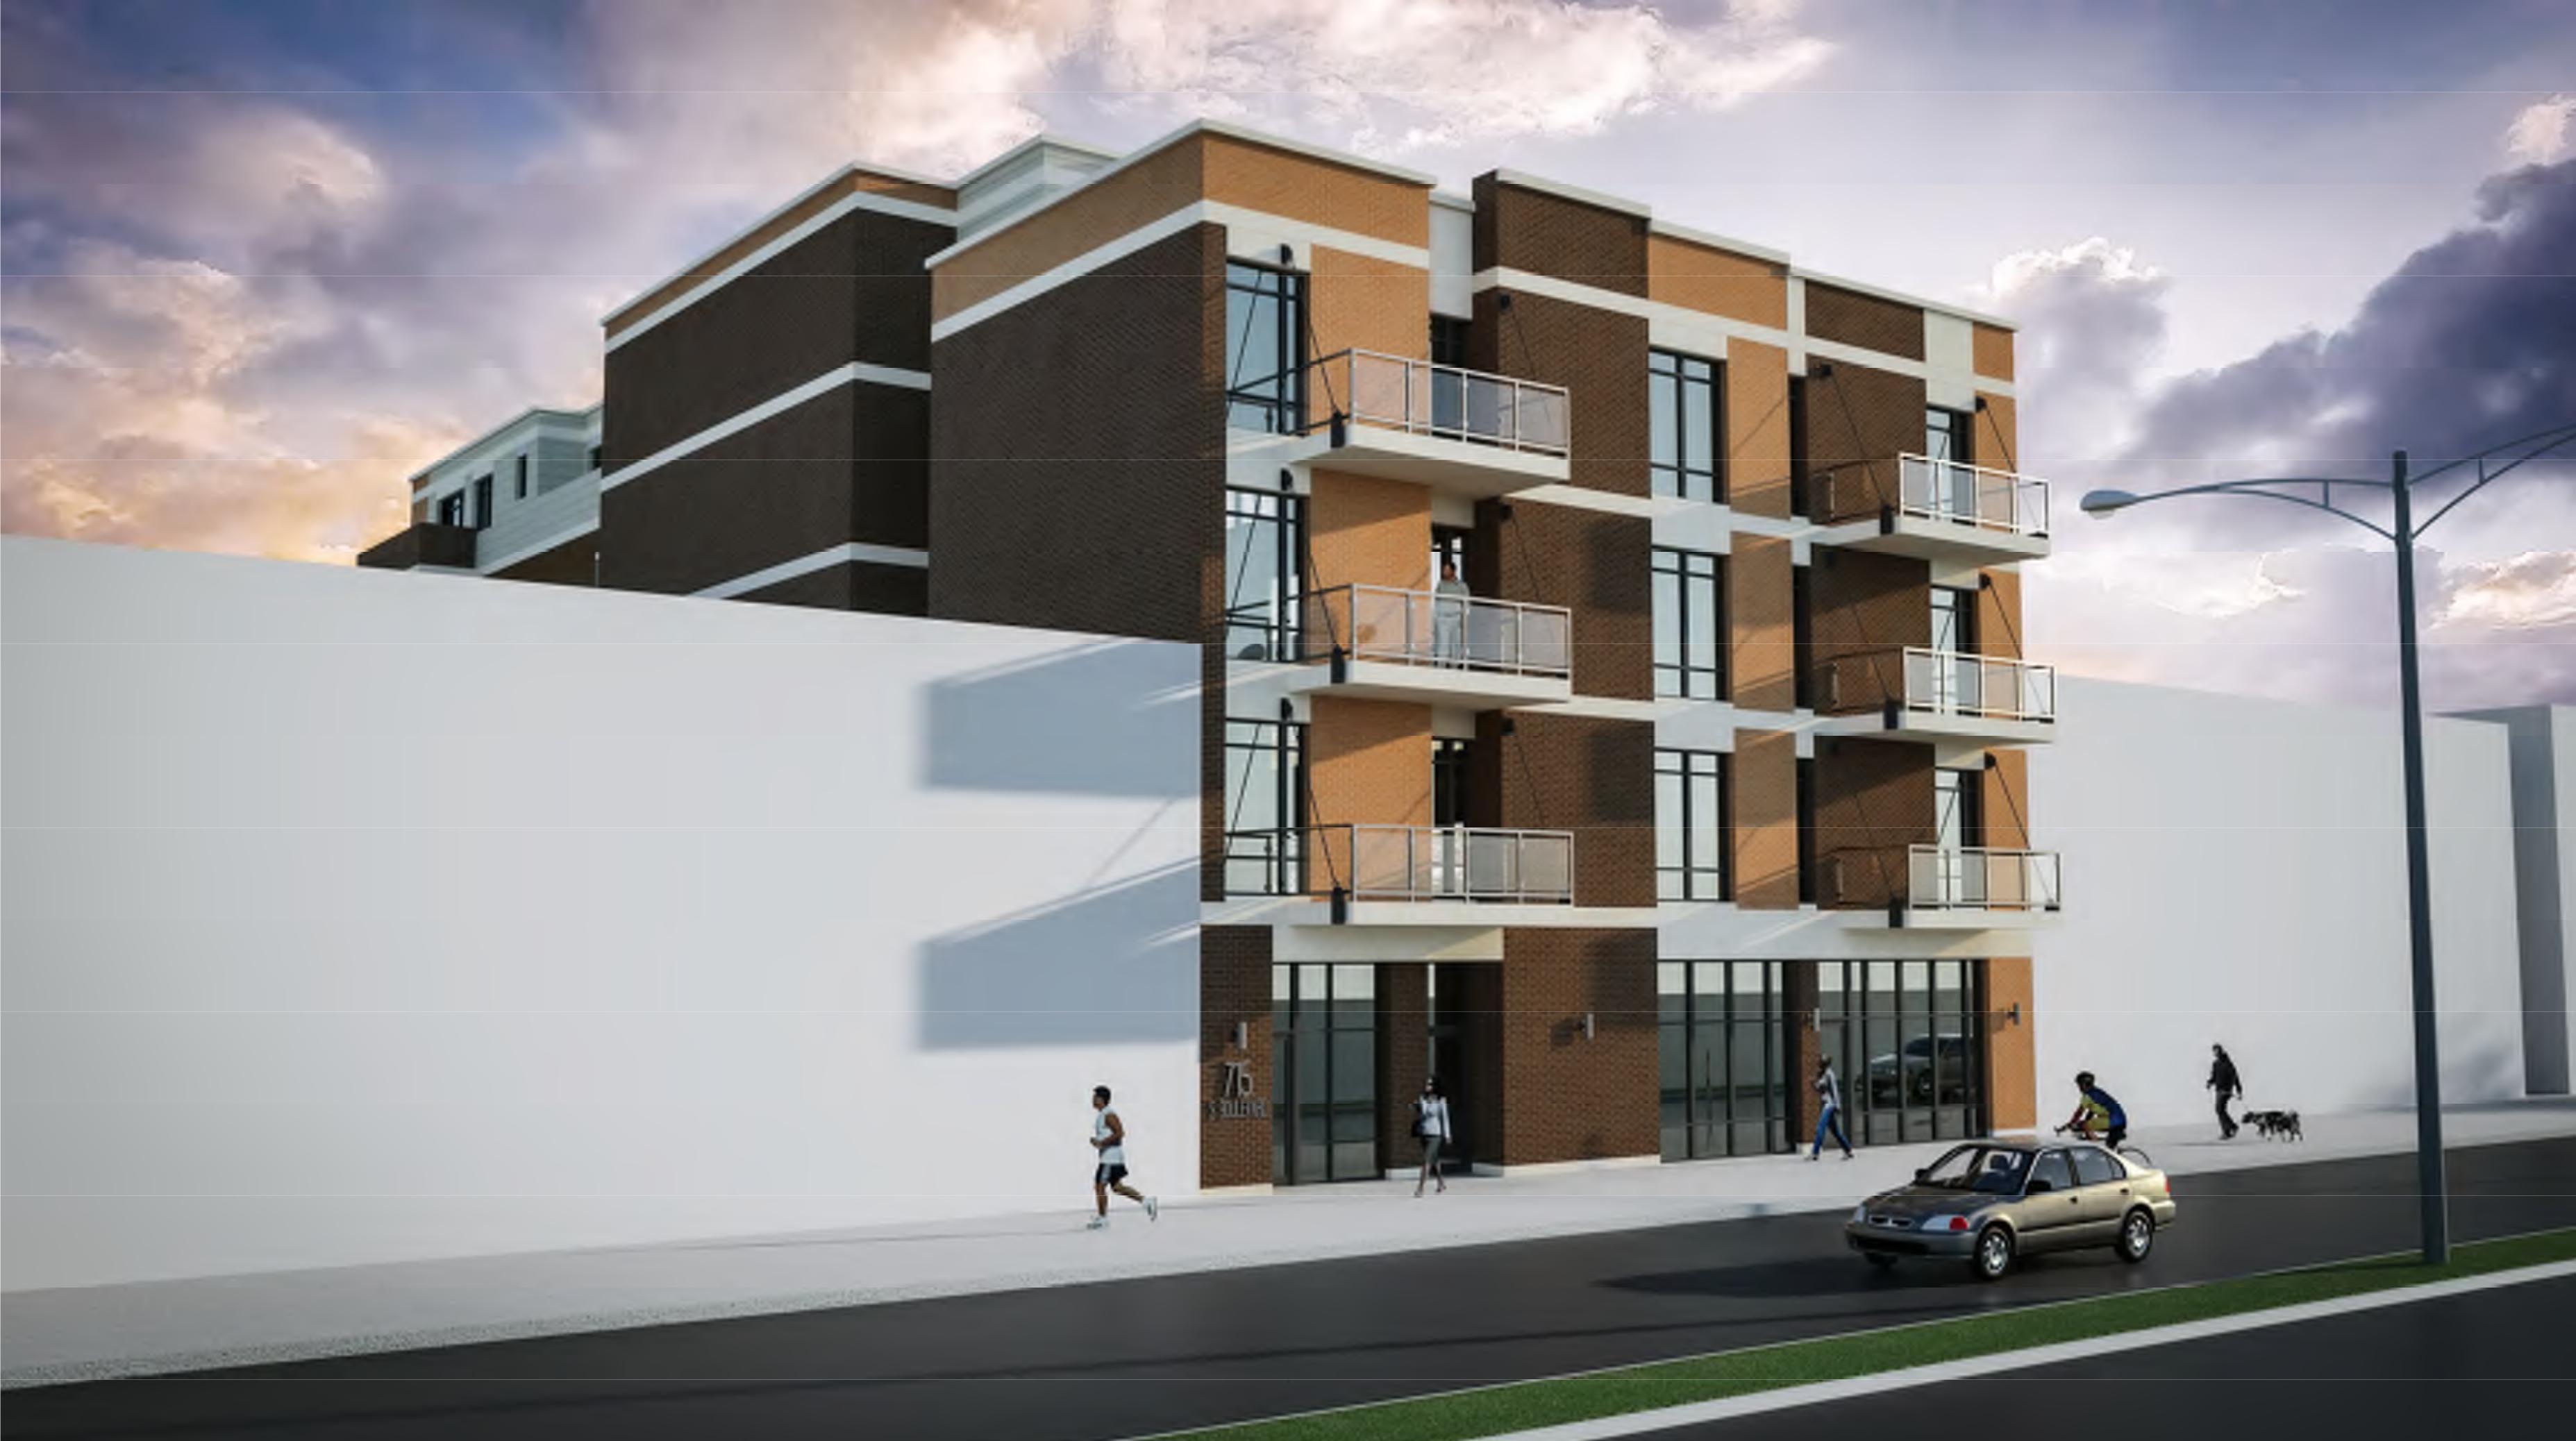 Rendering of the Residences of South Boulevard development